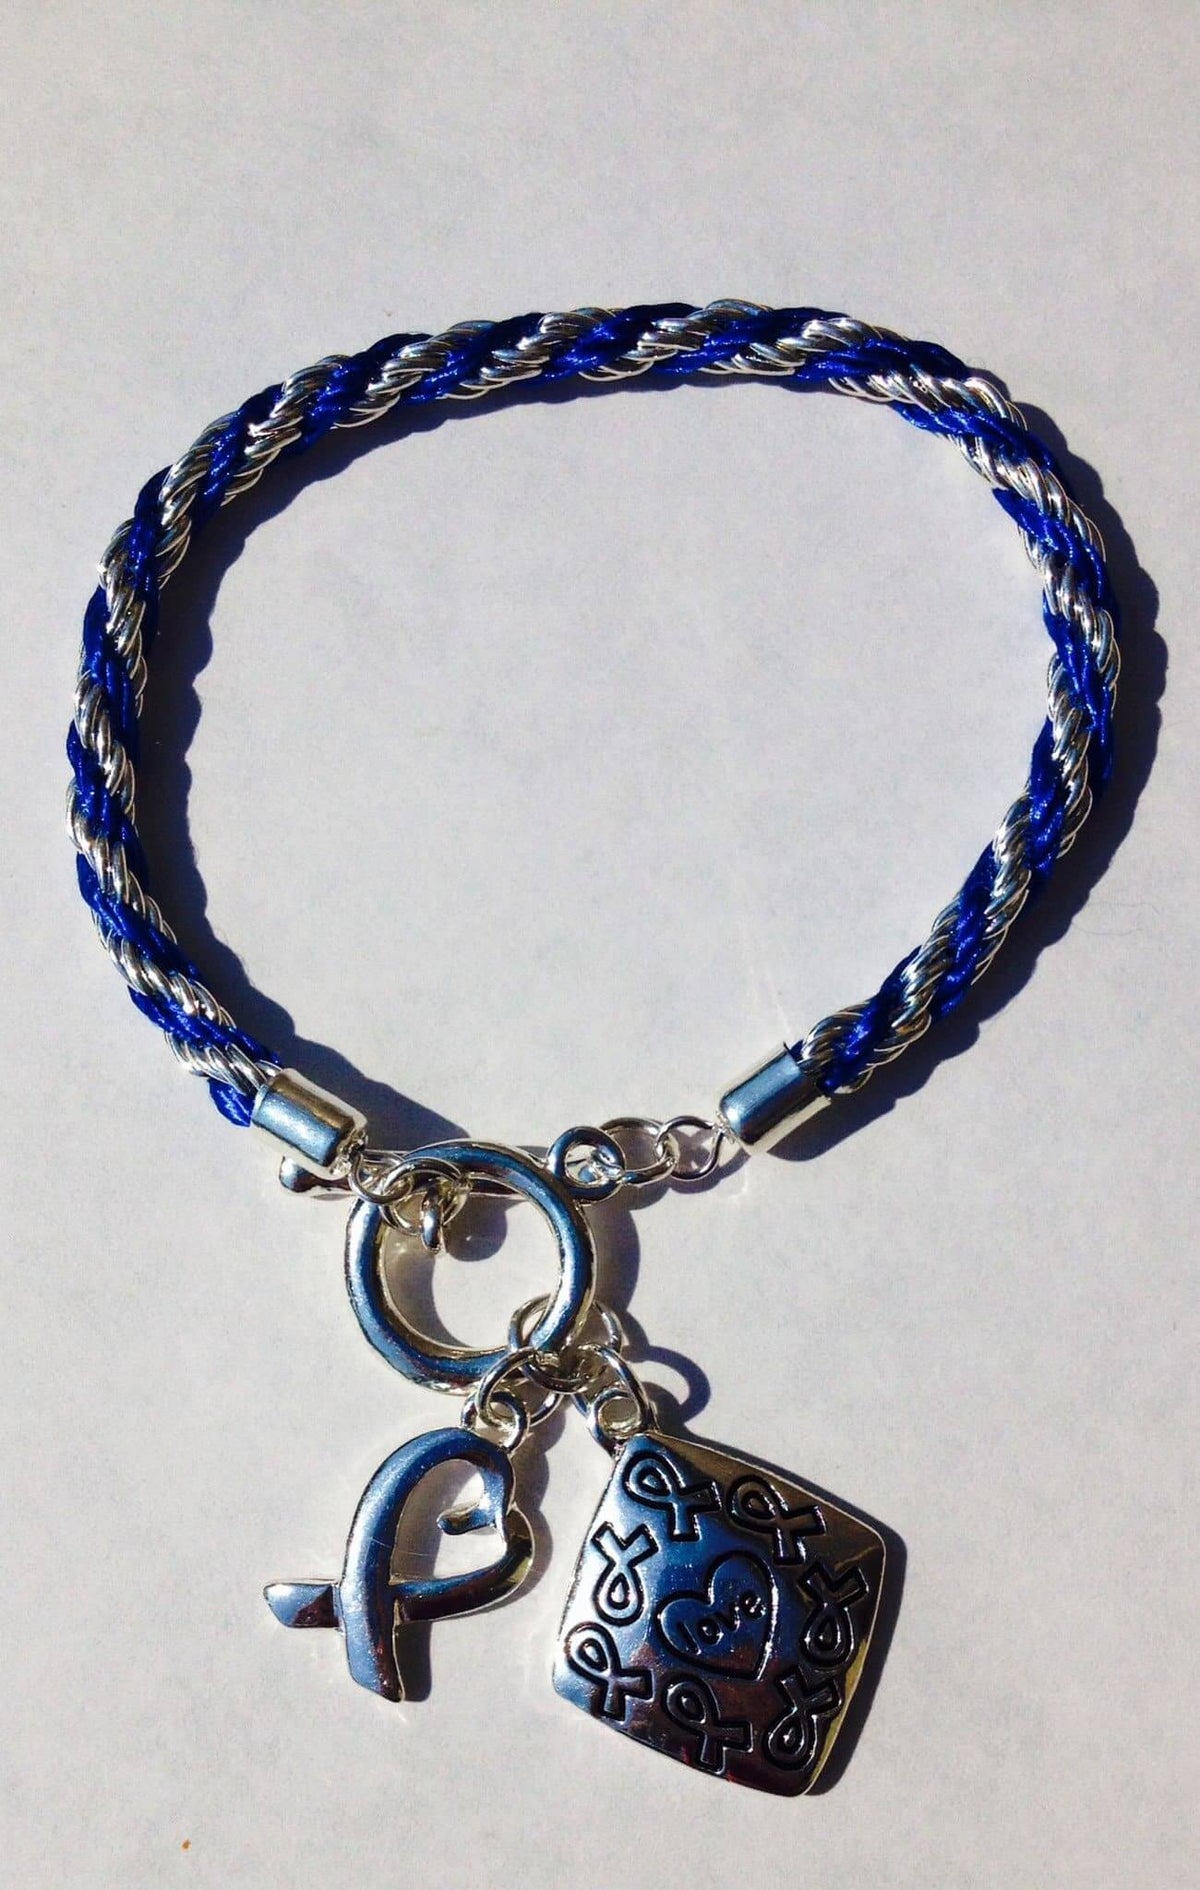 Awareness Causes SUPPORT BLUE Rope Bracelet Puzzle Ribbon and Charm - The House of Awareness